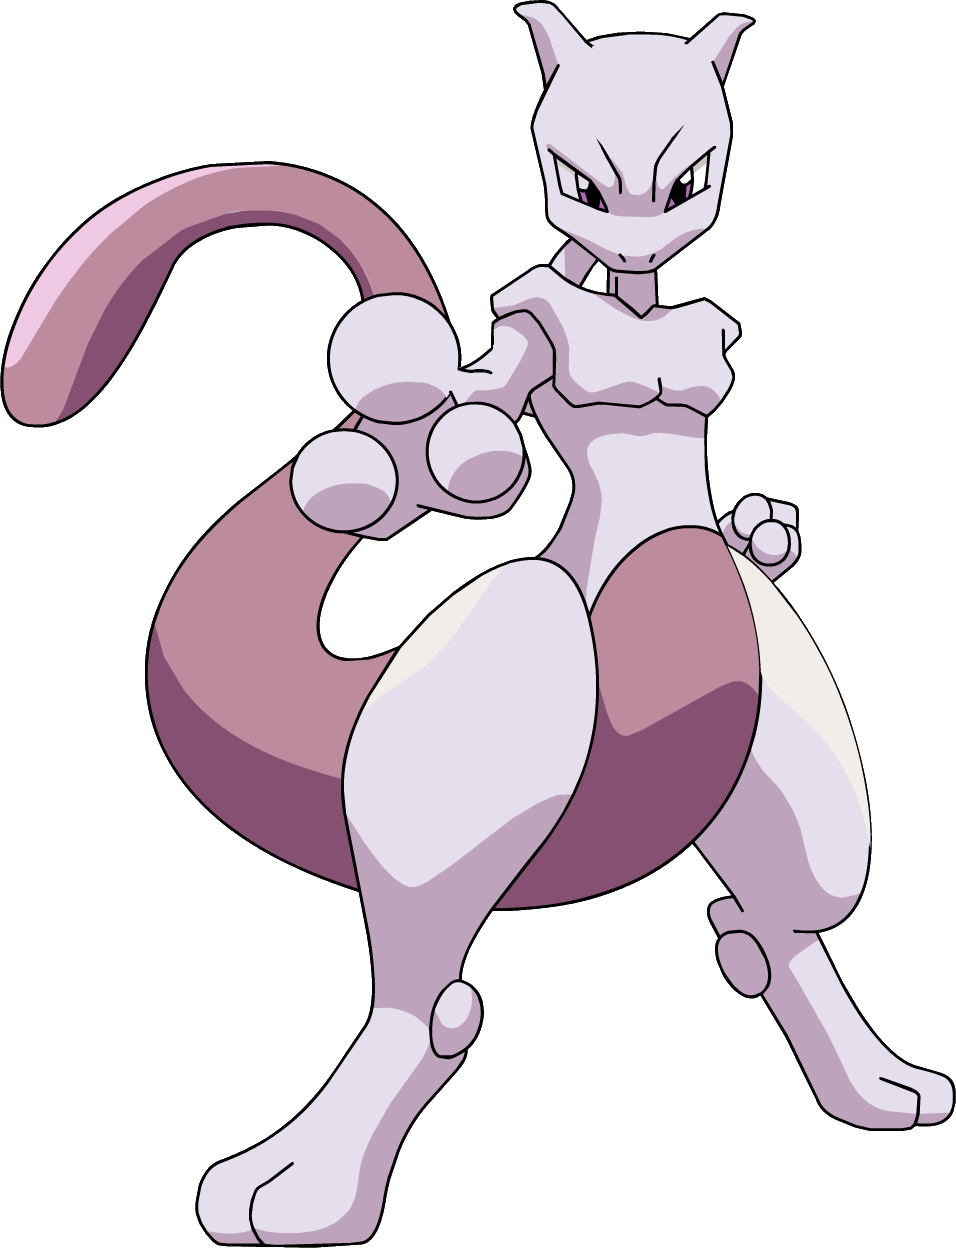 mewtwo 투명 이미지 PNG